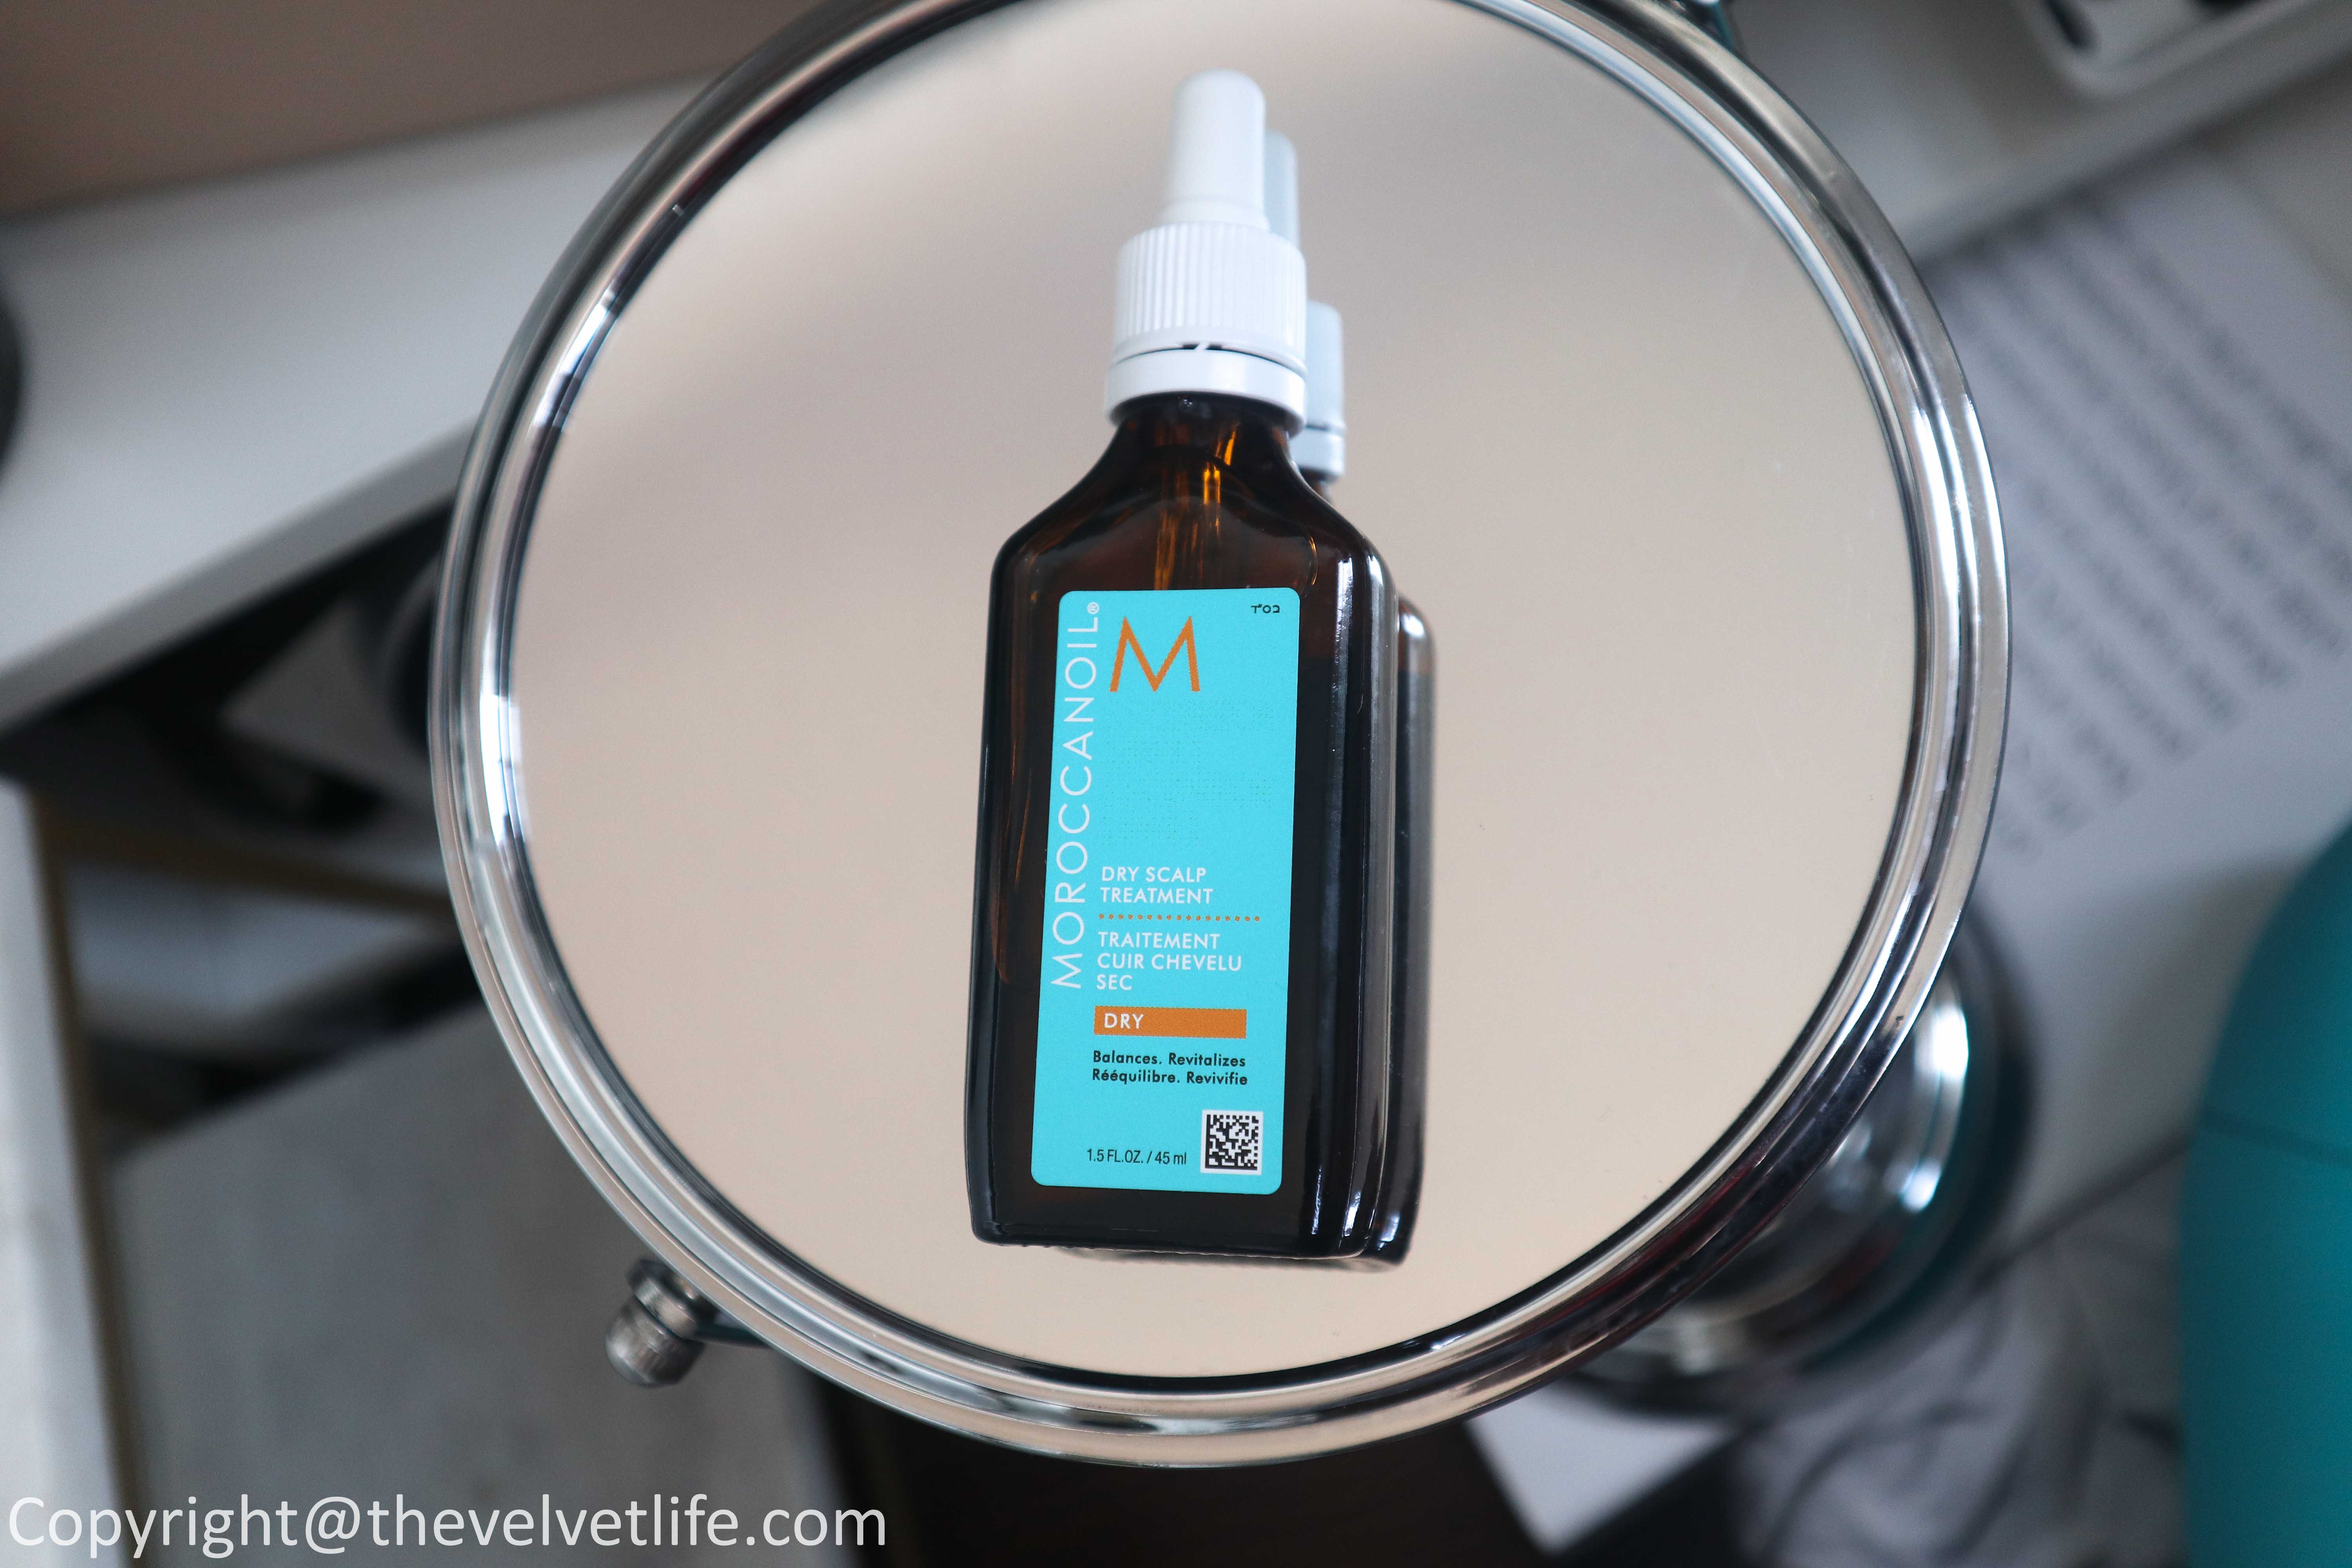 Review of Moroccanoil Dry Scalp Treatment, Weightless Hydrating Mask, and Curl Defining Cream for my itchy sensitive scalp